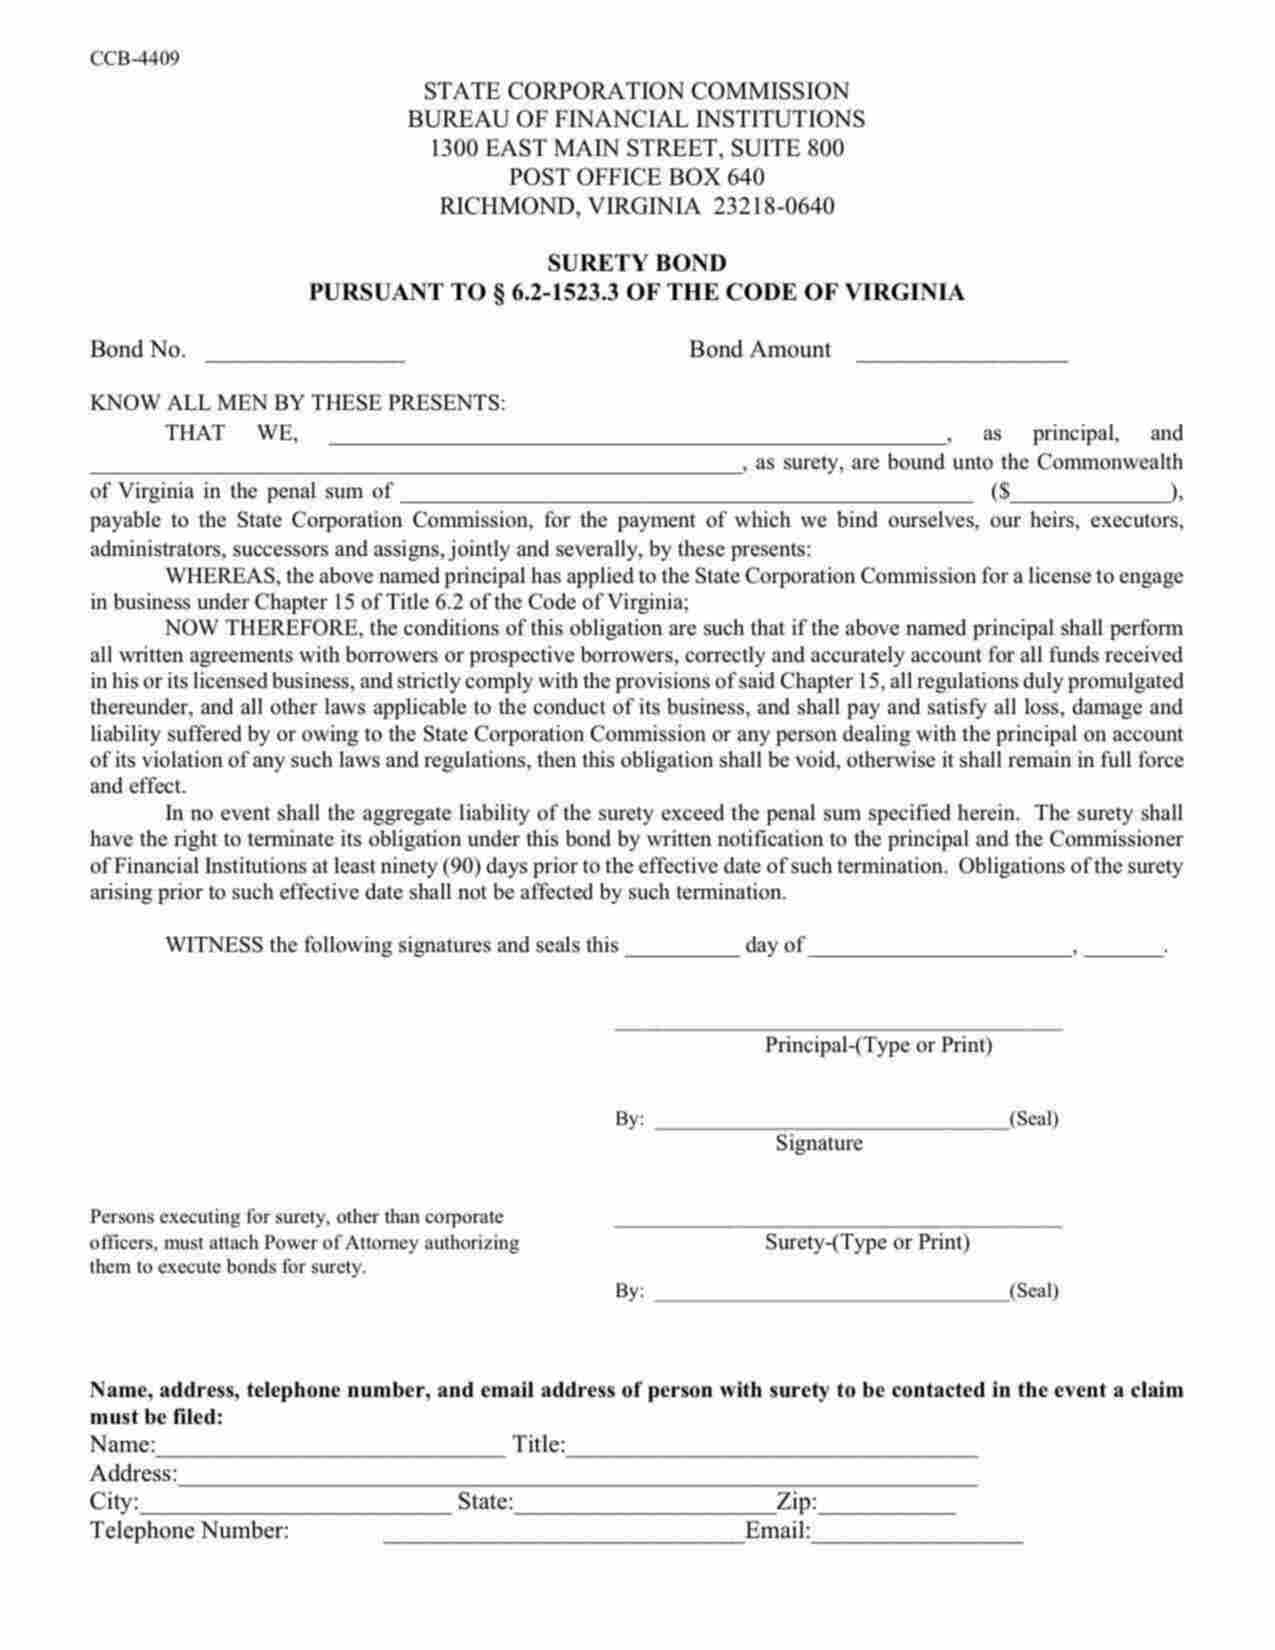 Virginia Consumer Finance Company (Pursuant to 6.2-1523.3  of the Code of Virginia) Bond Form